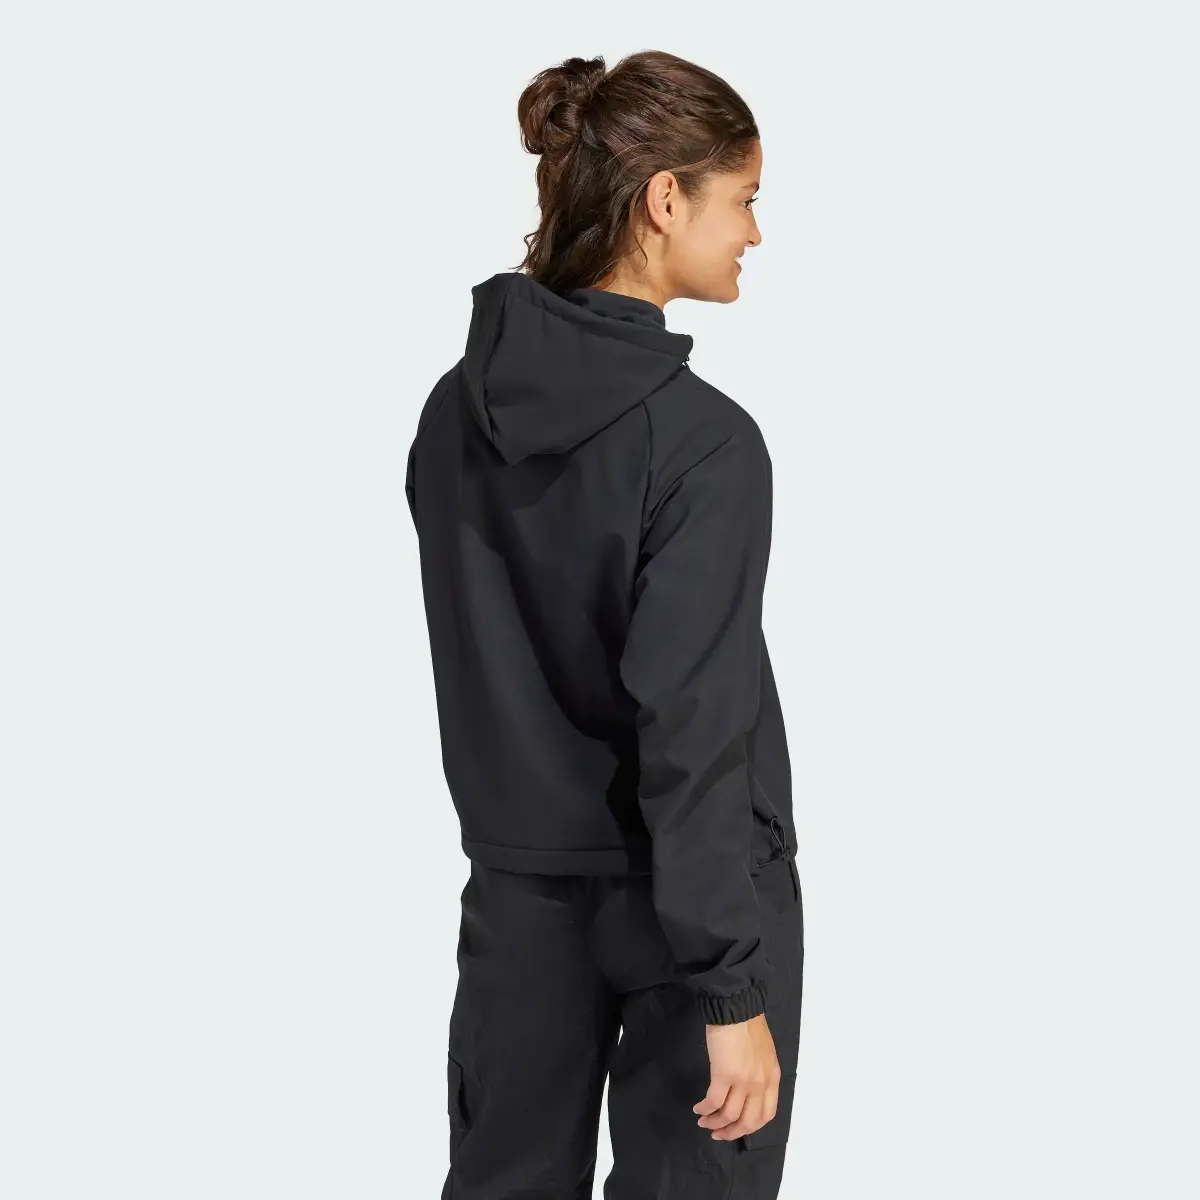 Adidas City Escape Bungee Cord Hoodie. 3